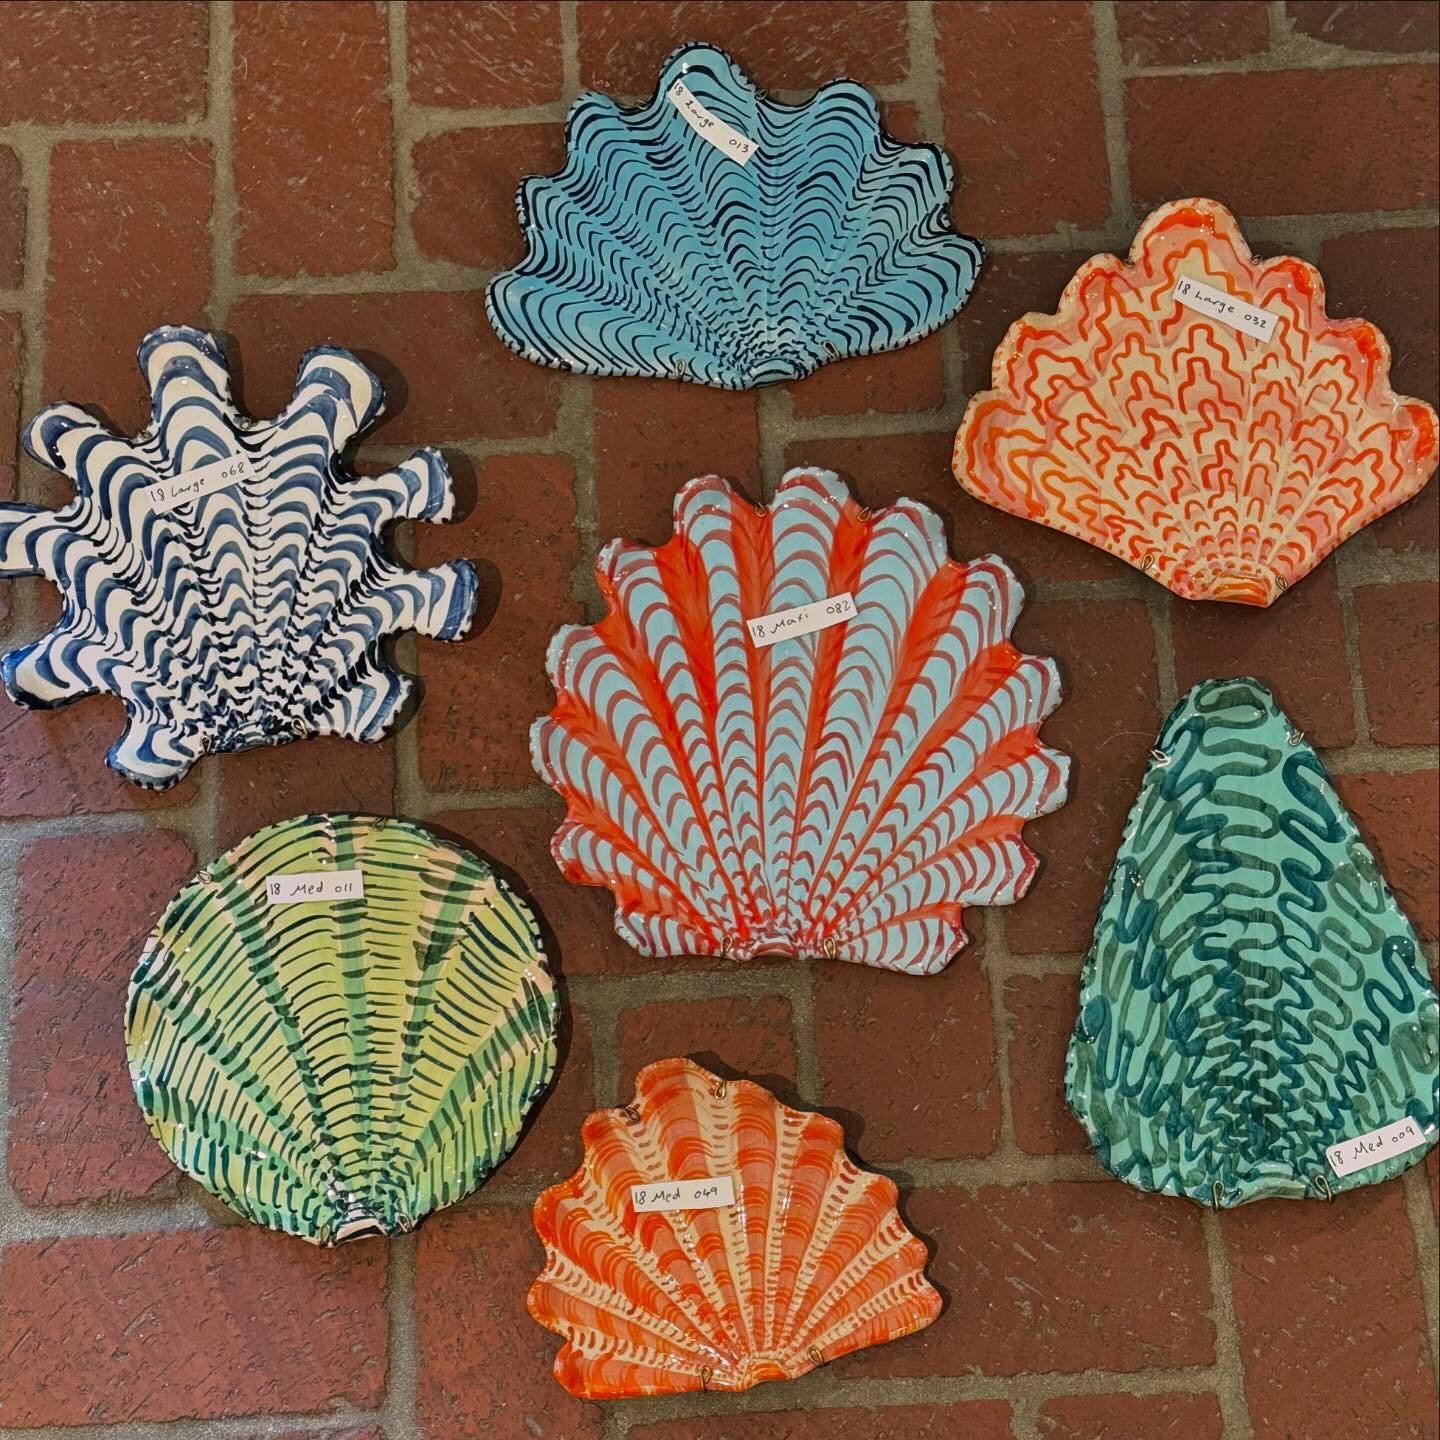 Shells in every hue! Swipe through your see some available collections! Thank you @shellegance for creating these lovely ceramic works of art!